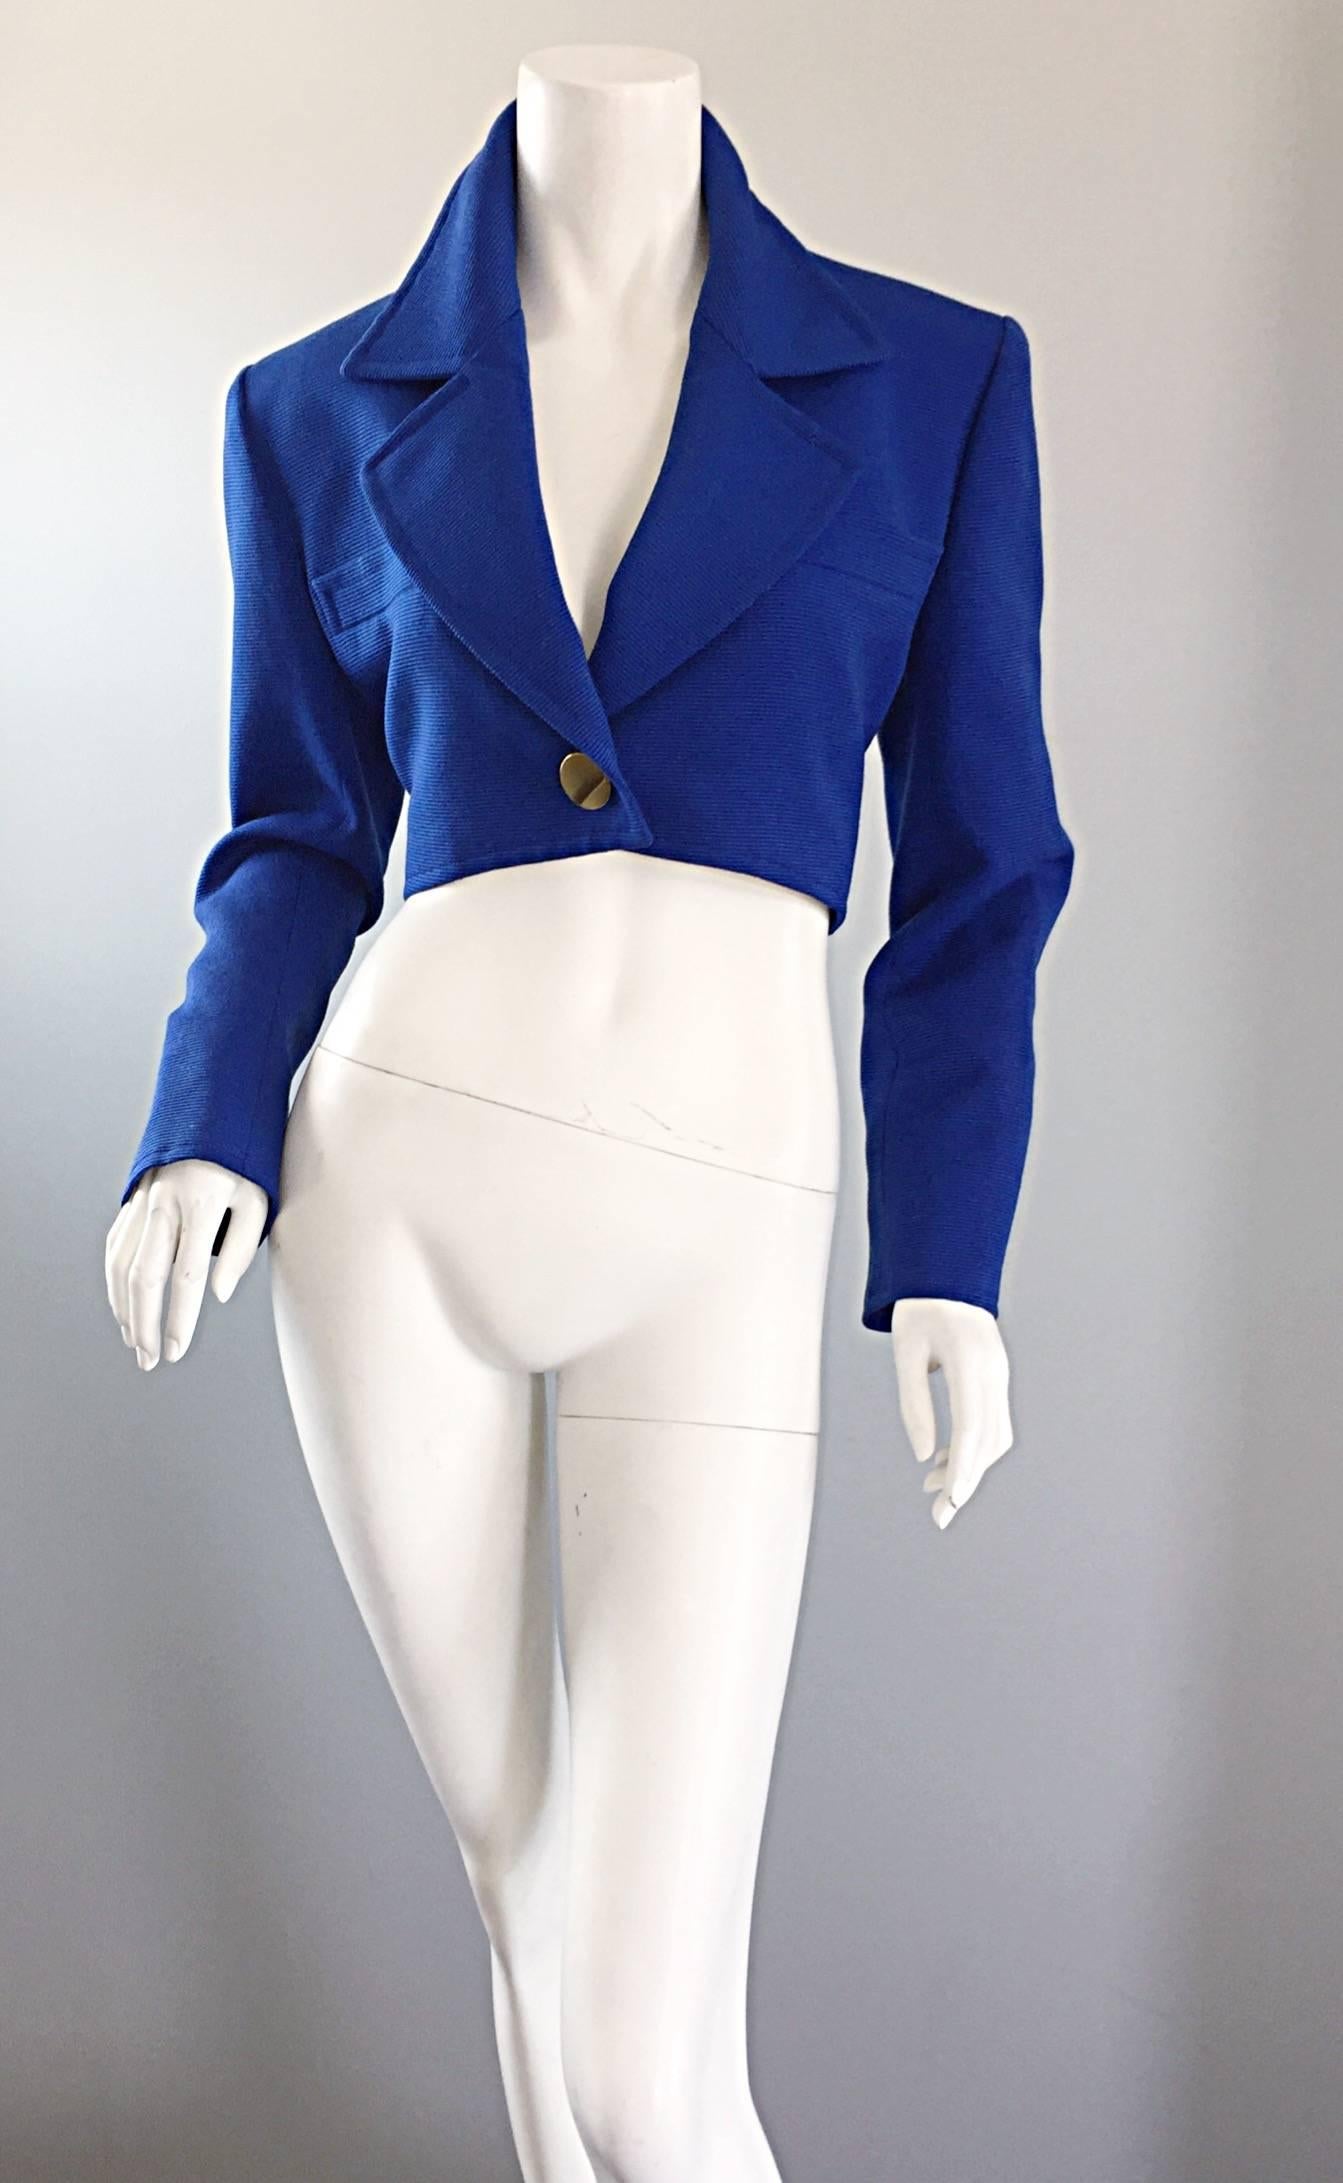 Amazing vintage YVES SAINT LAURENT ( YSL ) Rive Gauche cropped electric blue bolero blazer! Features an oversize gold button at waist and at each sleeve cuff (spare buttons are sewn to the interior). Chic slim fit that looks wonderful on! Fully